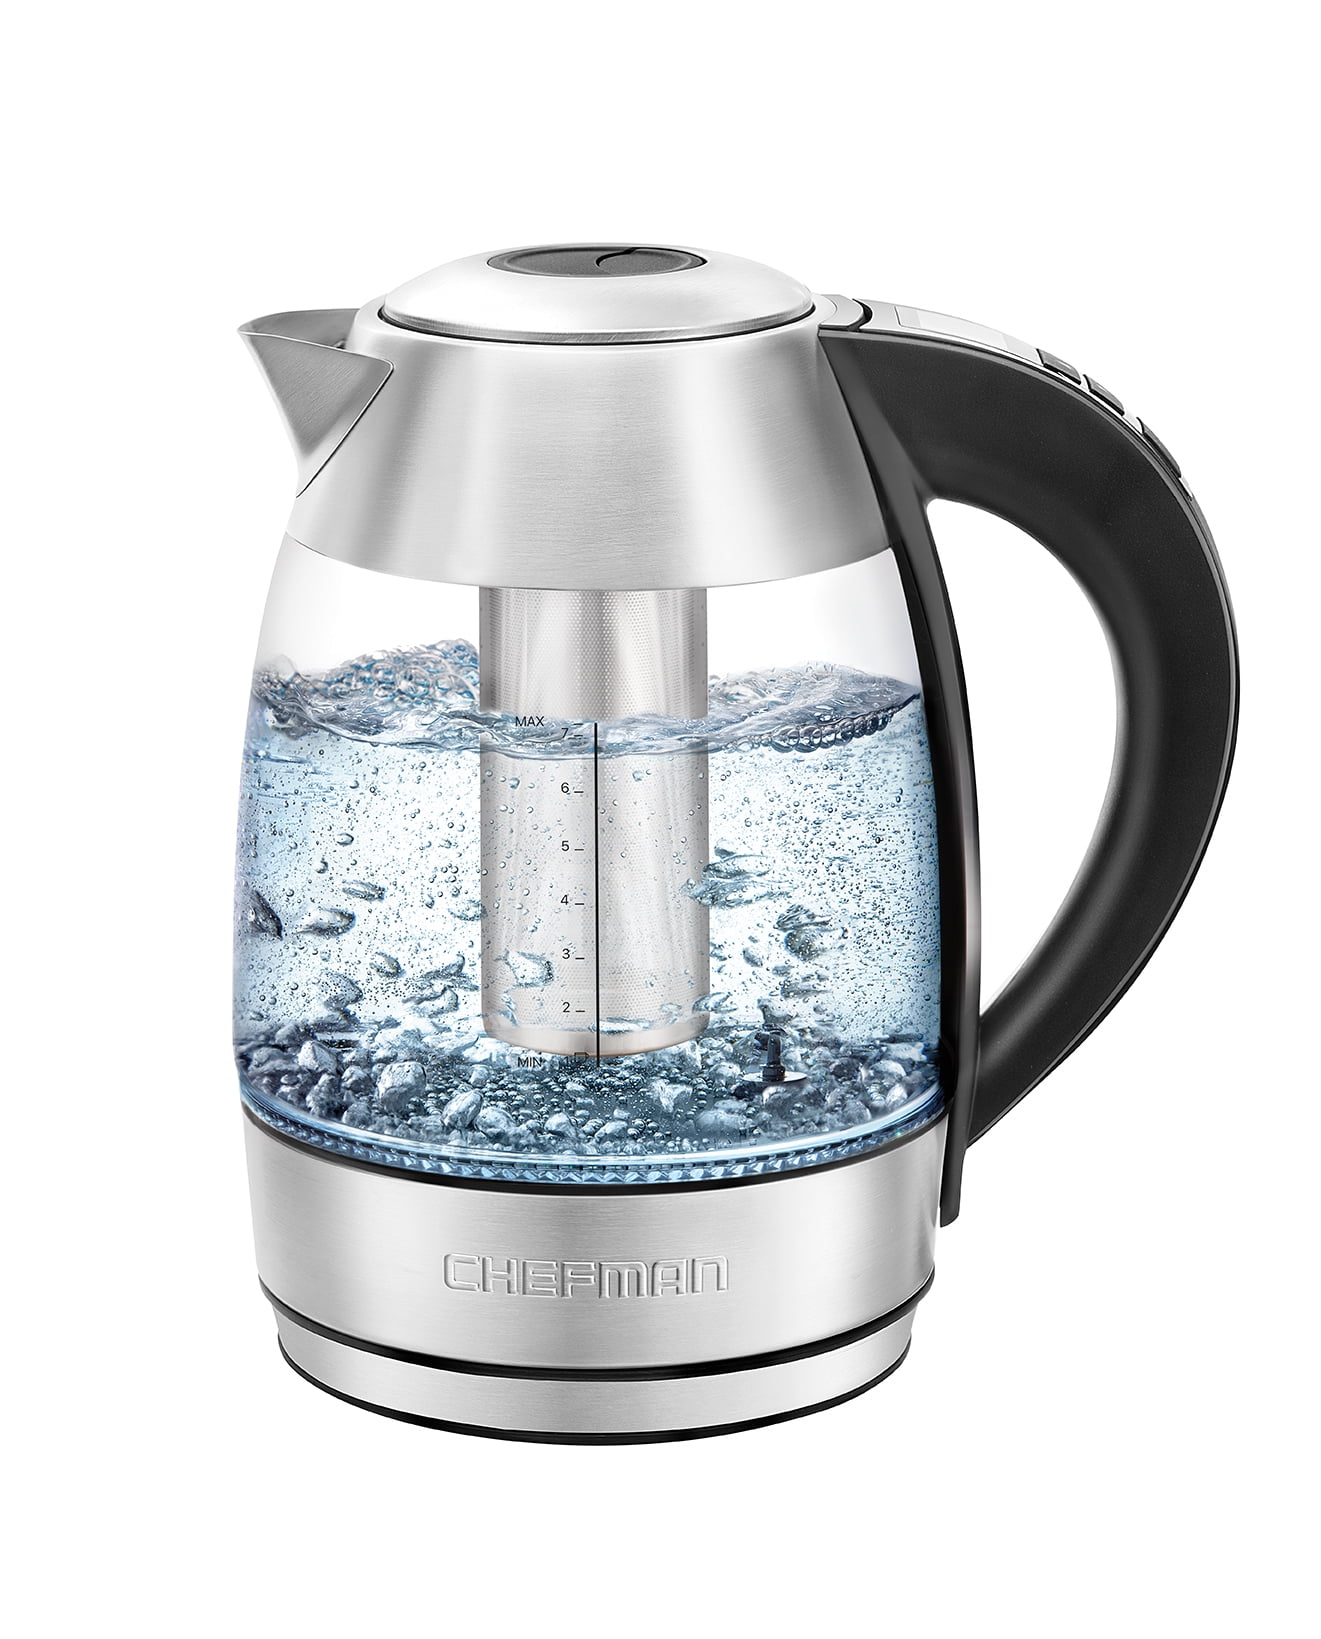 MELNG 1800ml Glass Electric Kettle 1500W Fast Hot Boiling